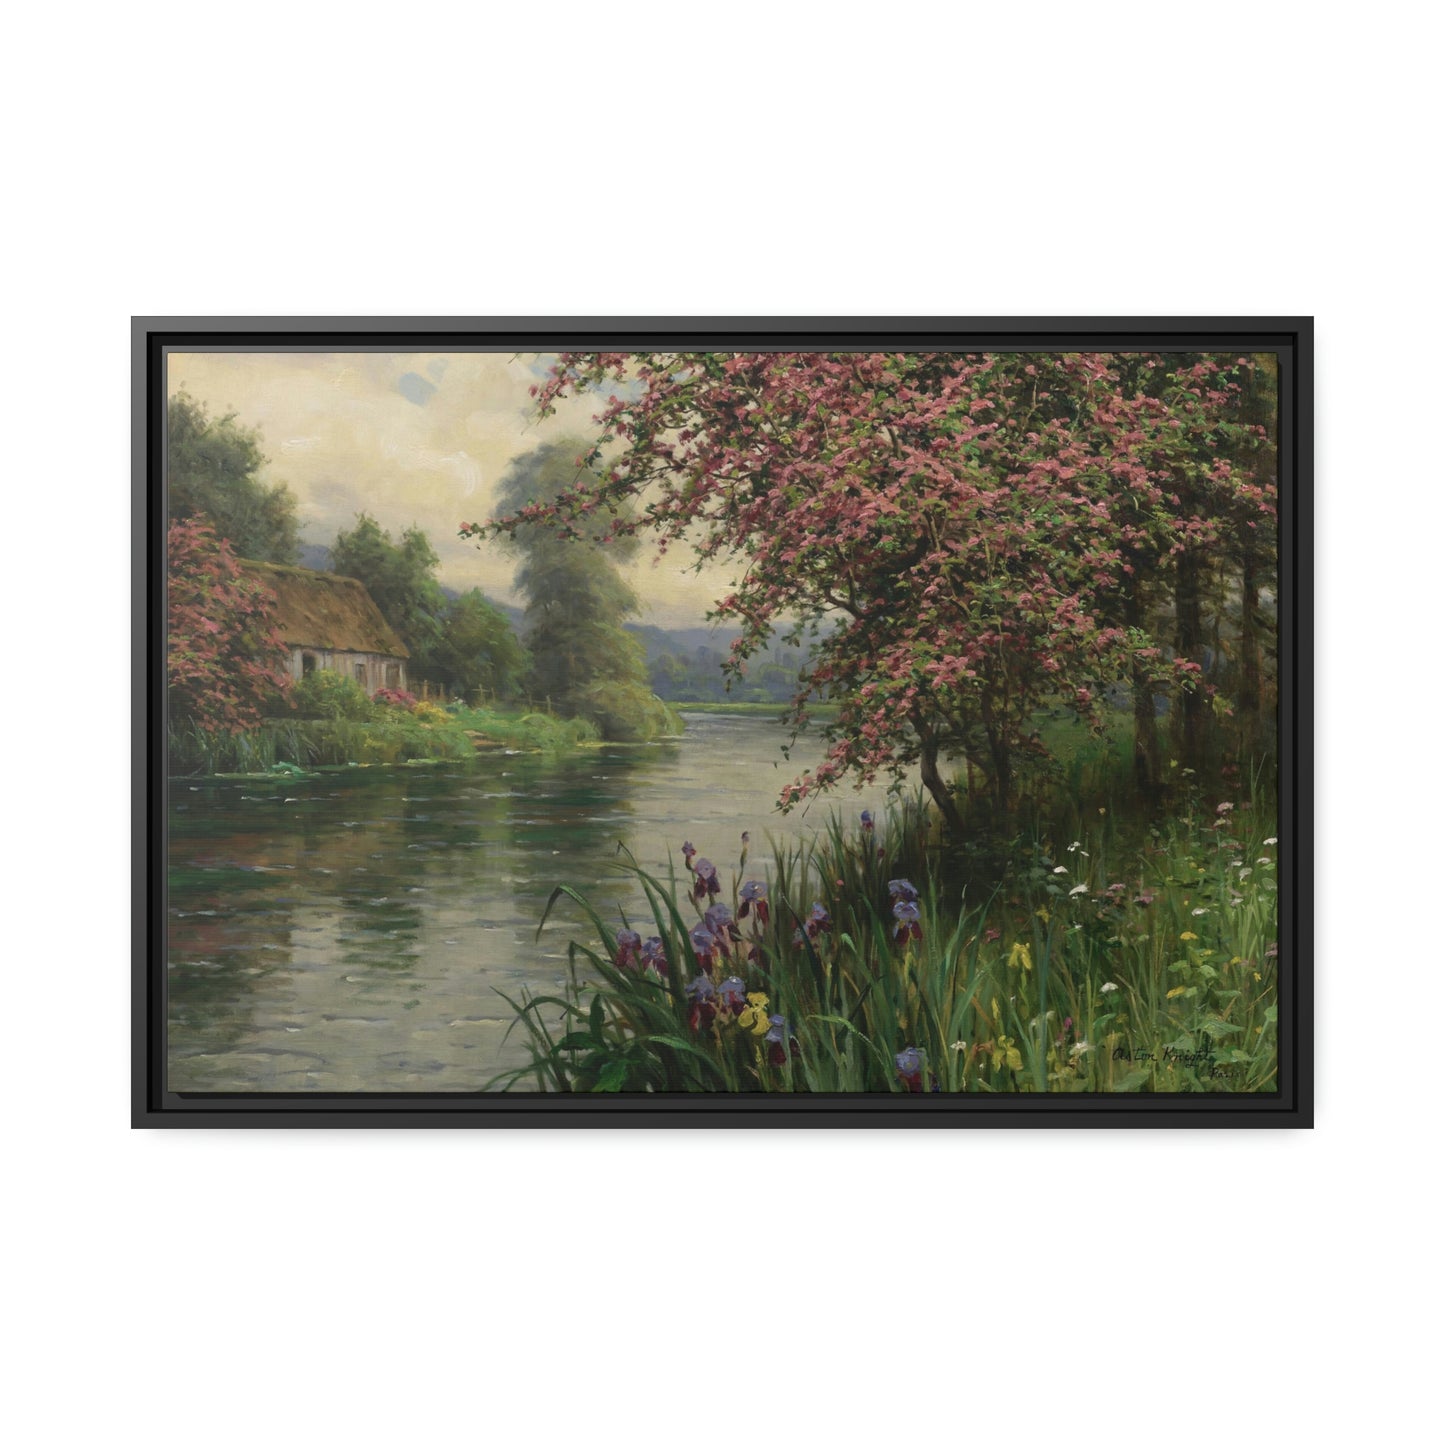 Louis Aston Knight: "Summer Along the River" - Framed Canvas Reproduction